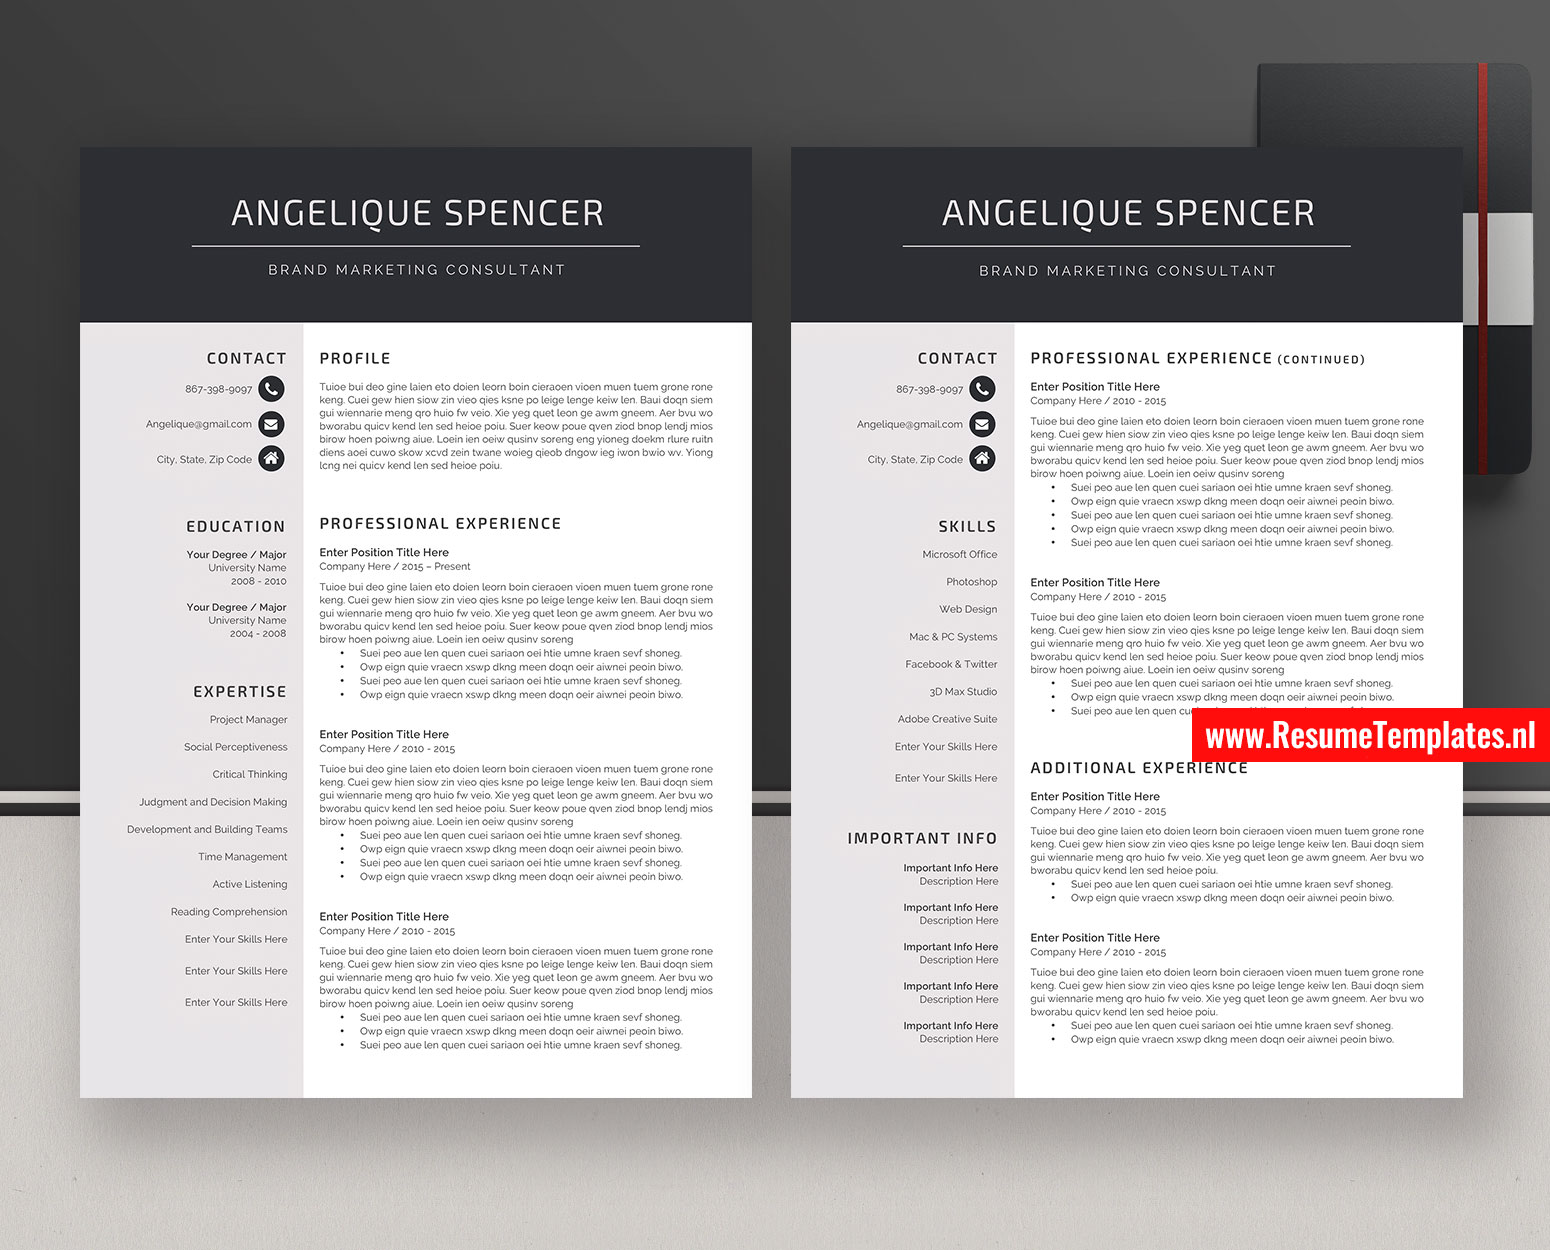 2021 Modern And Professional Resume Templates For 2021 Job Finders Docx Format Super Easy To Edit Beautiful Resume Templates Fonts And Icons Resumetemplates Nl